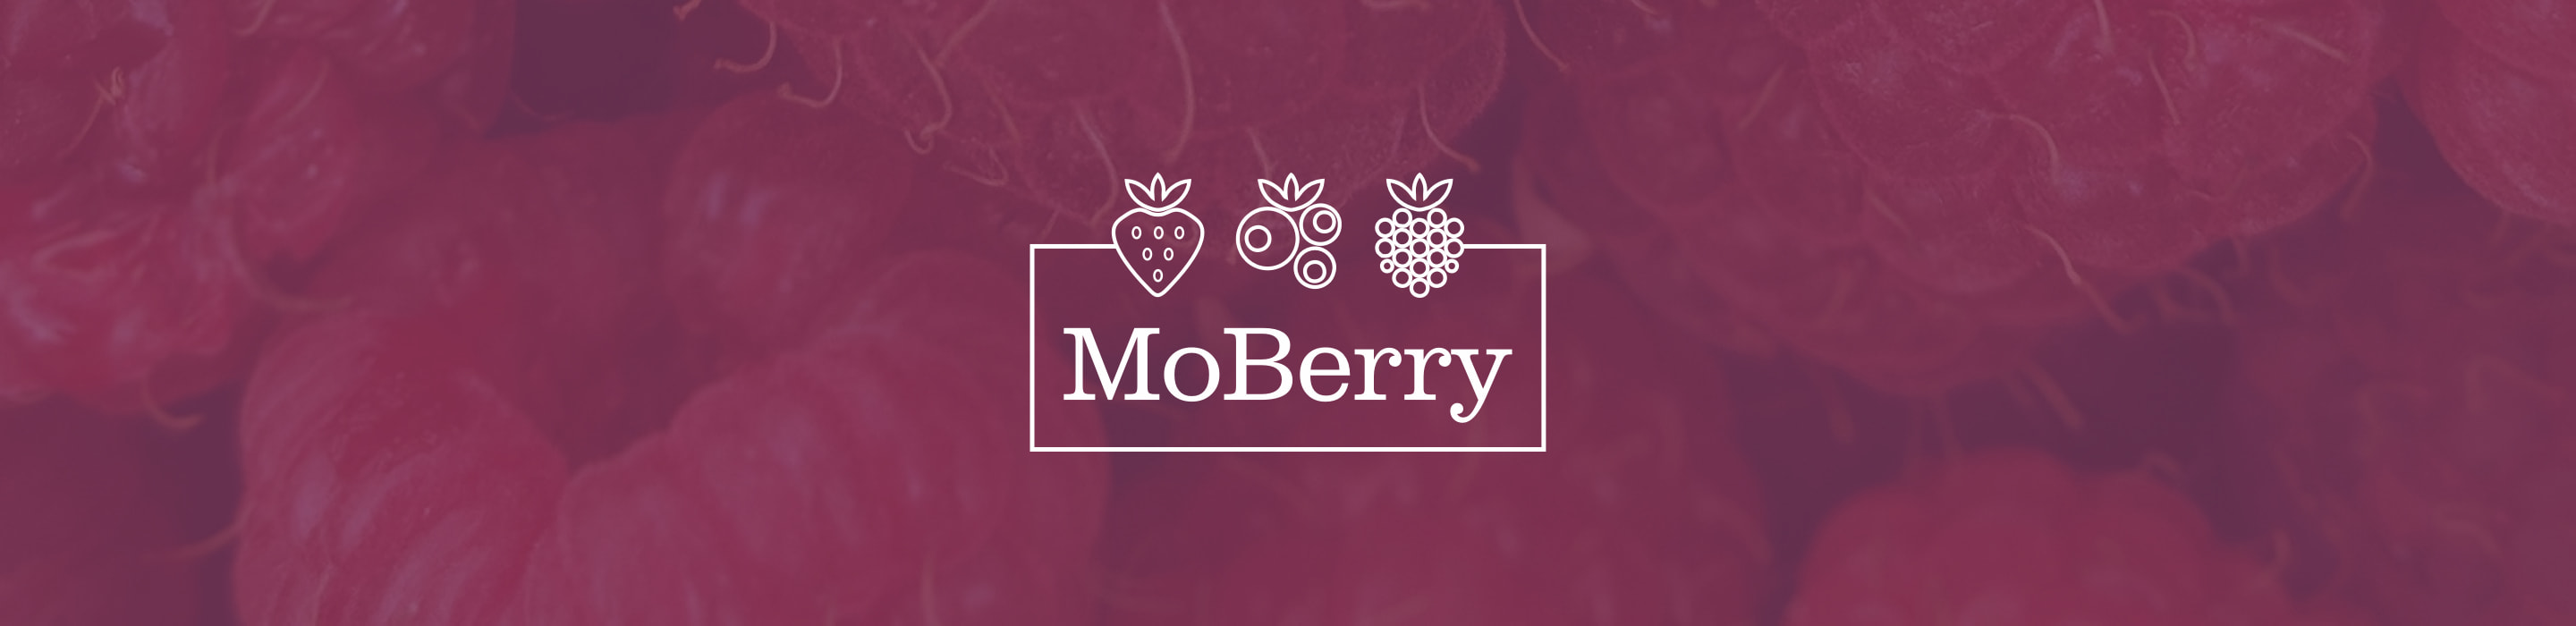 MoBerry